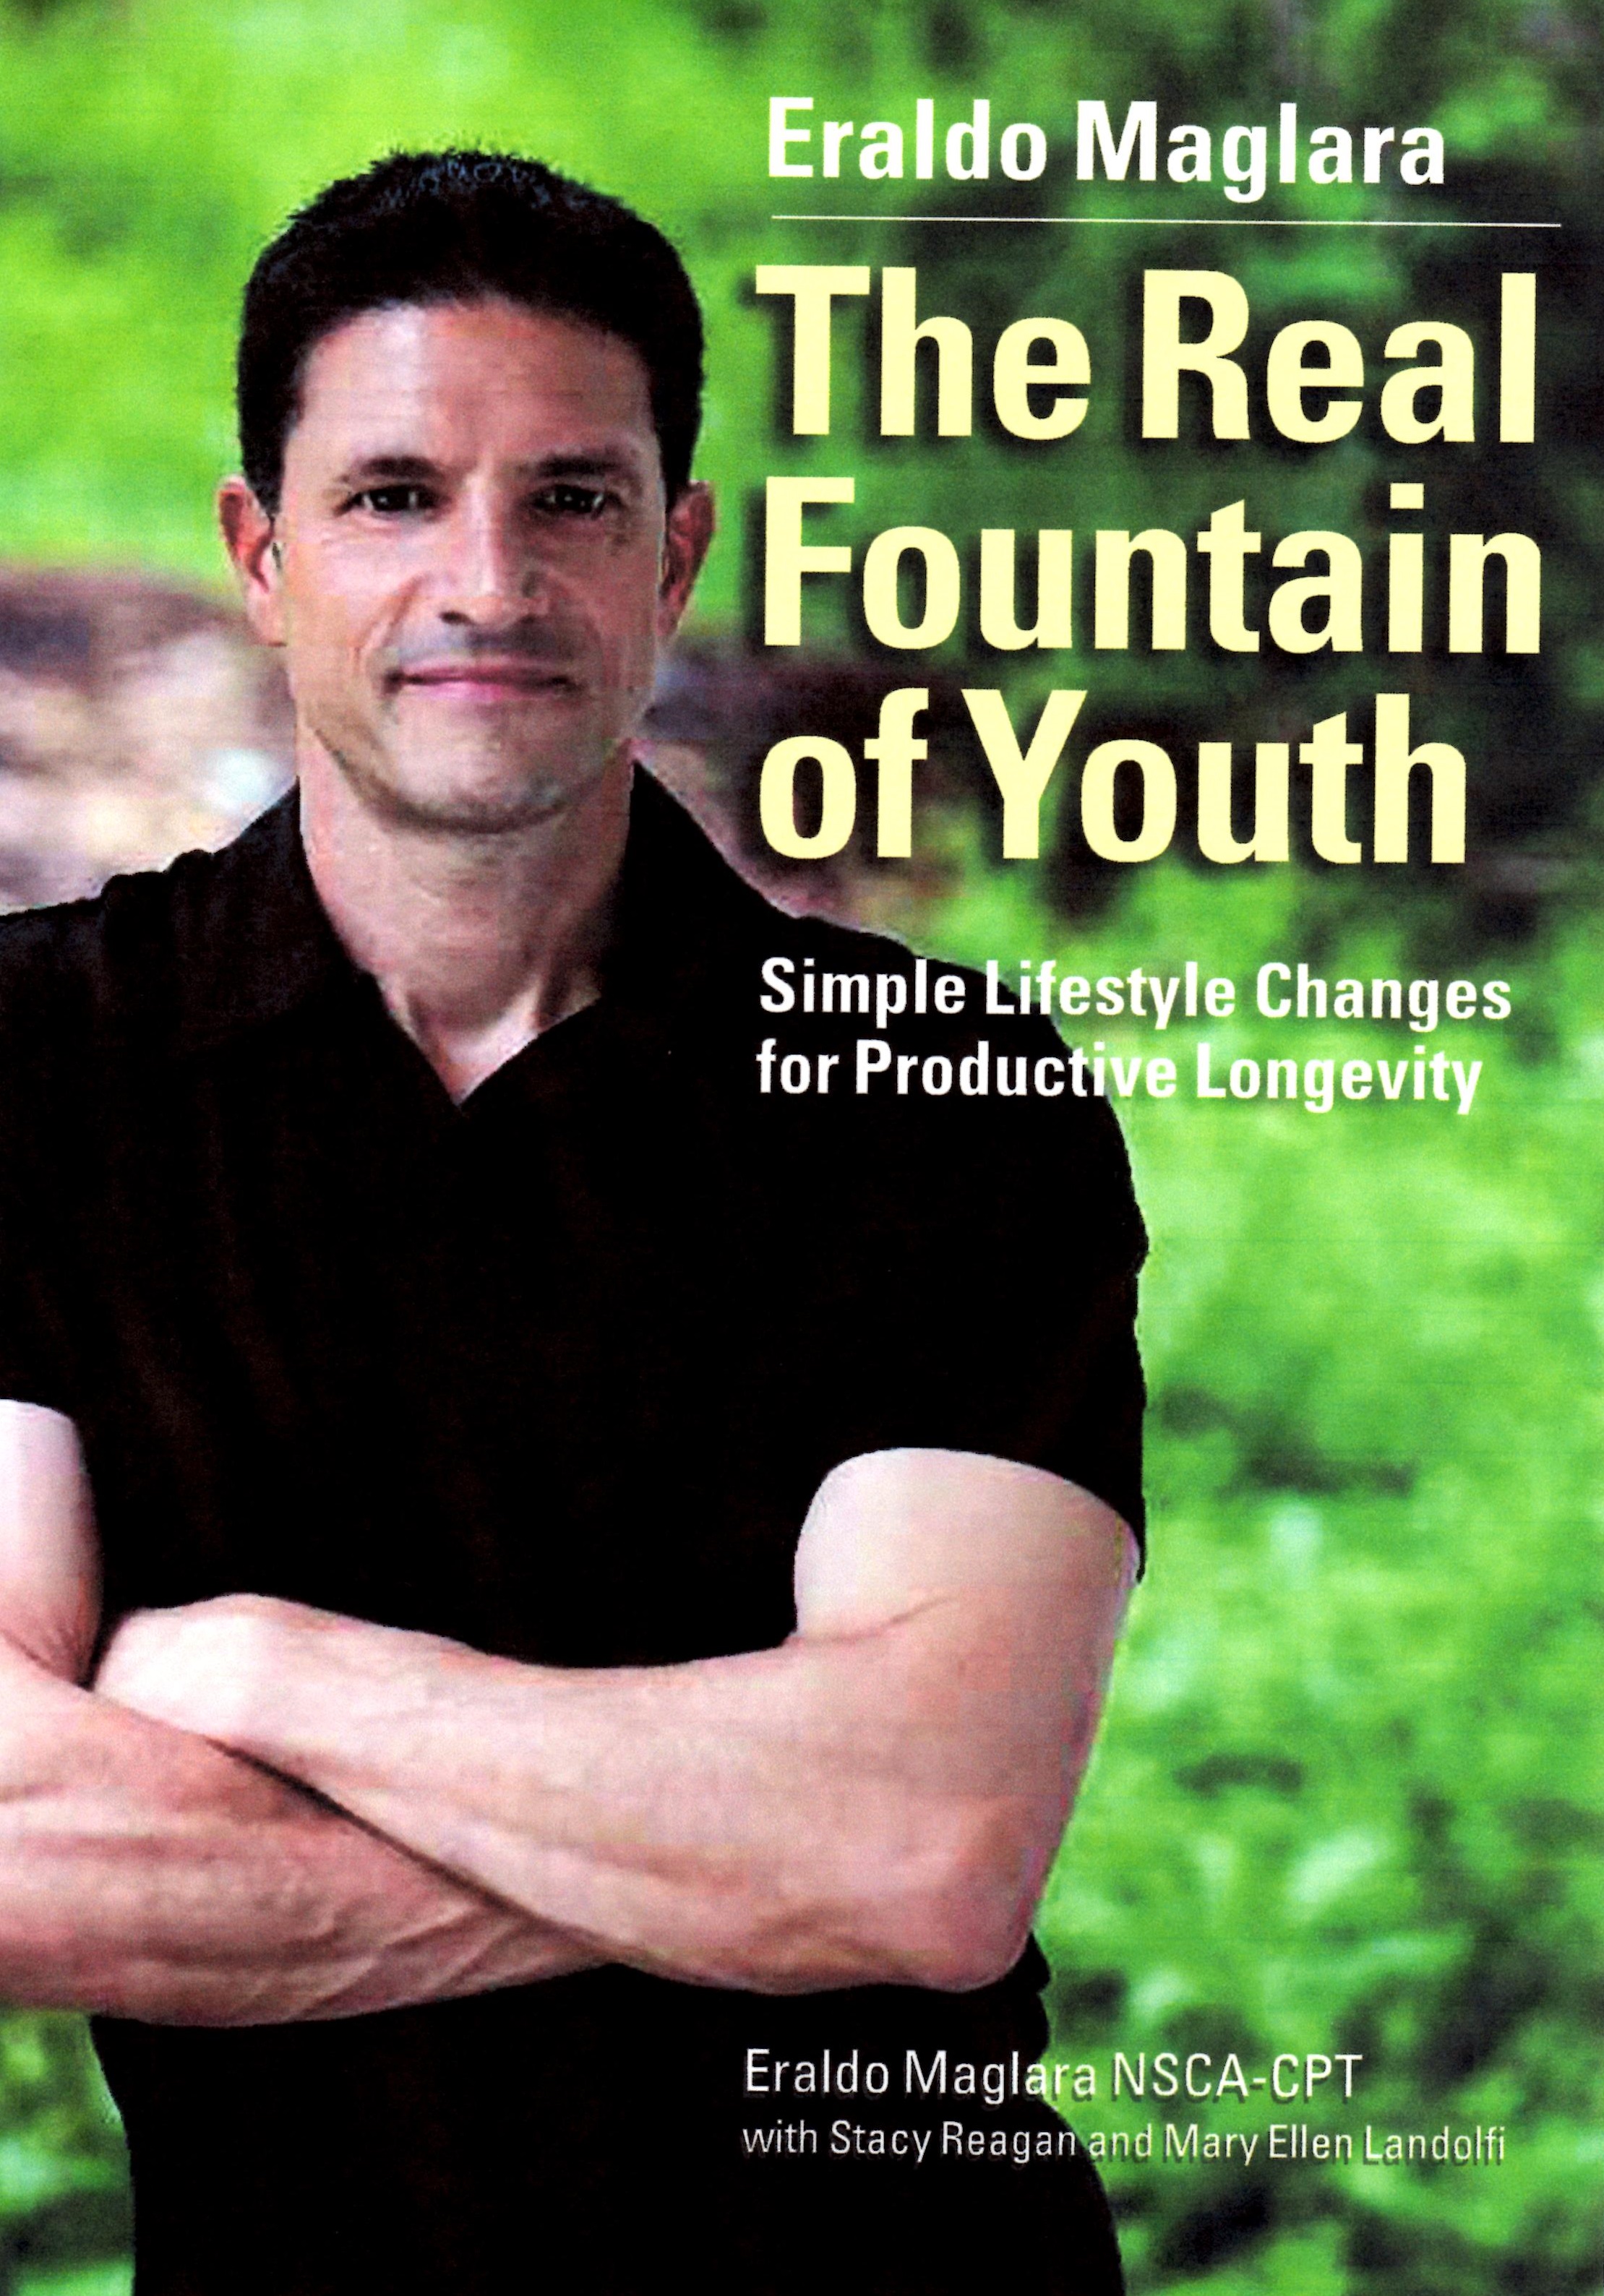 The Inspiration Behind The Real Fountain of Youth